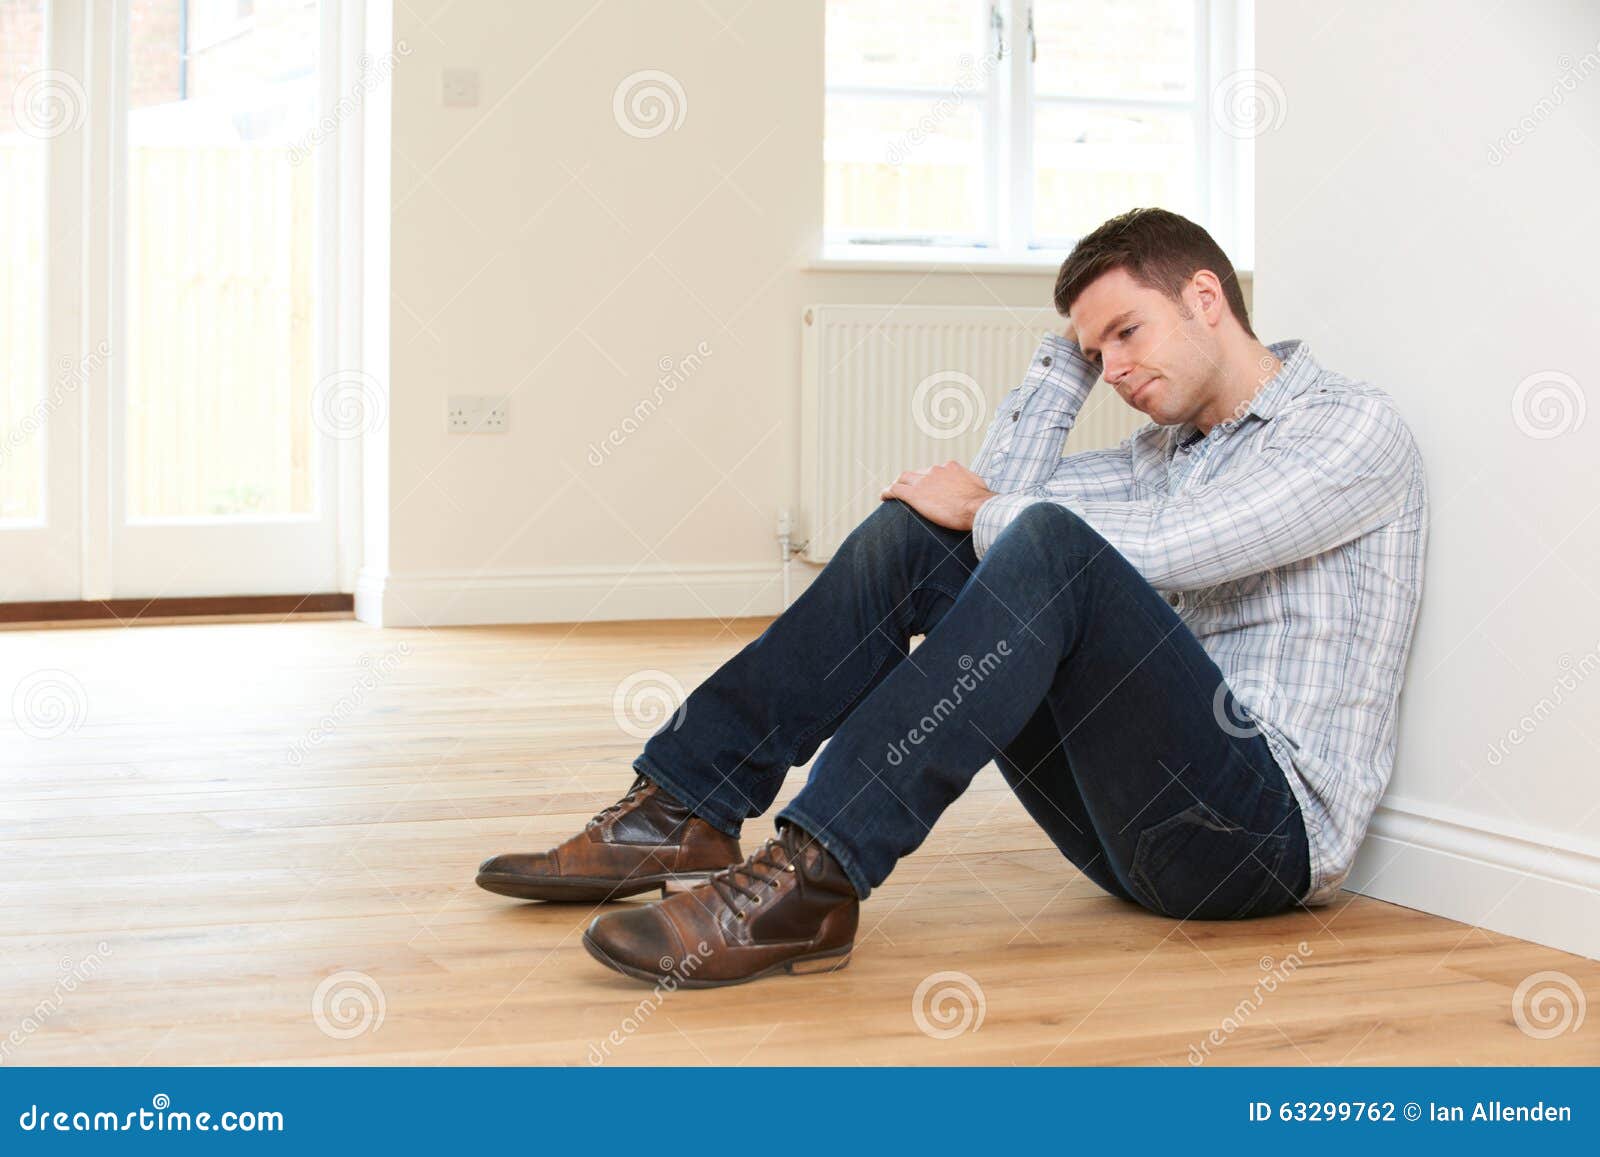 Depressed Man Sitting in Empty Room of Repossessed House Stock Photo ...